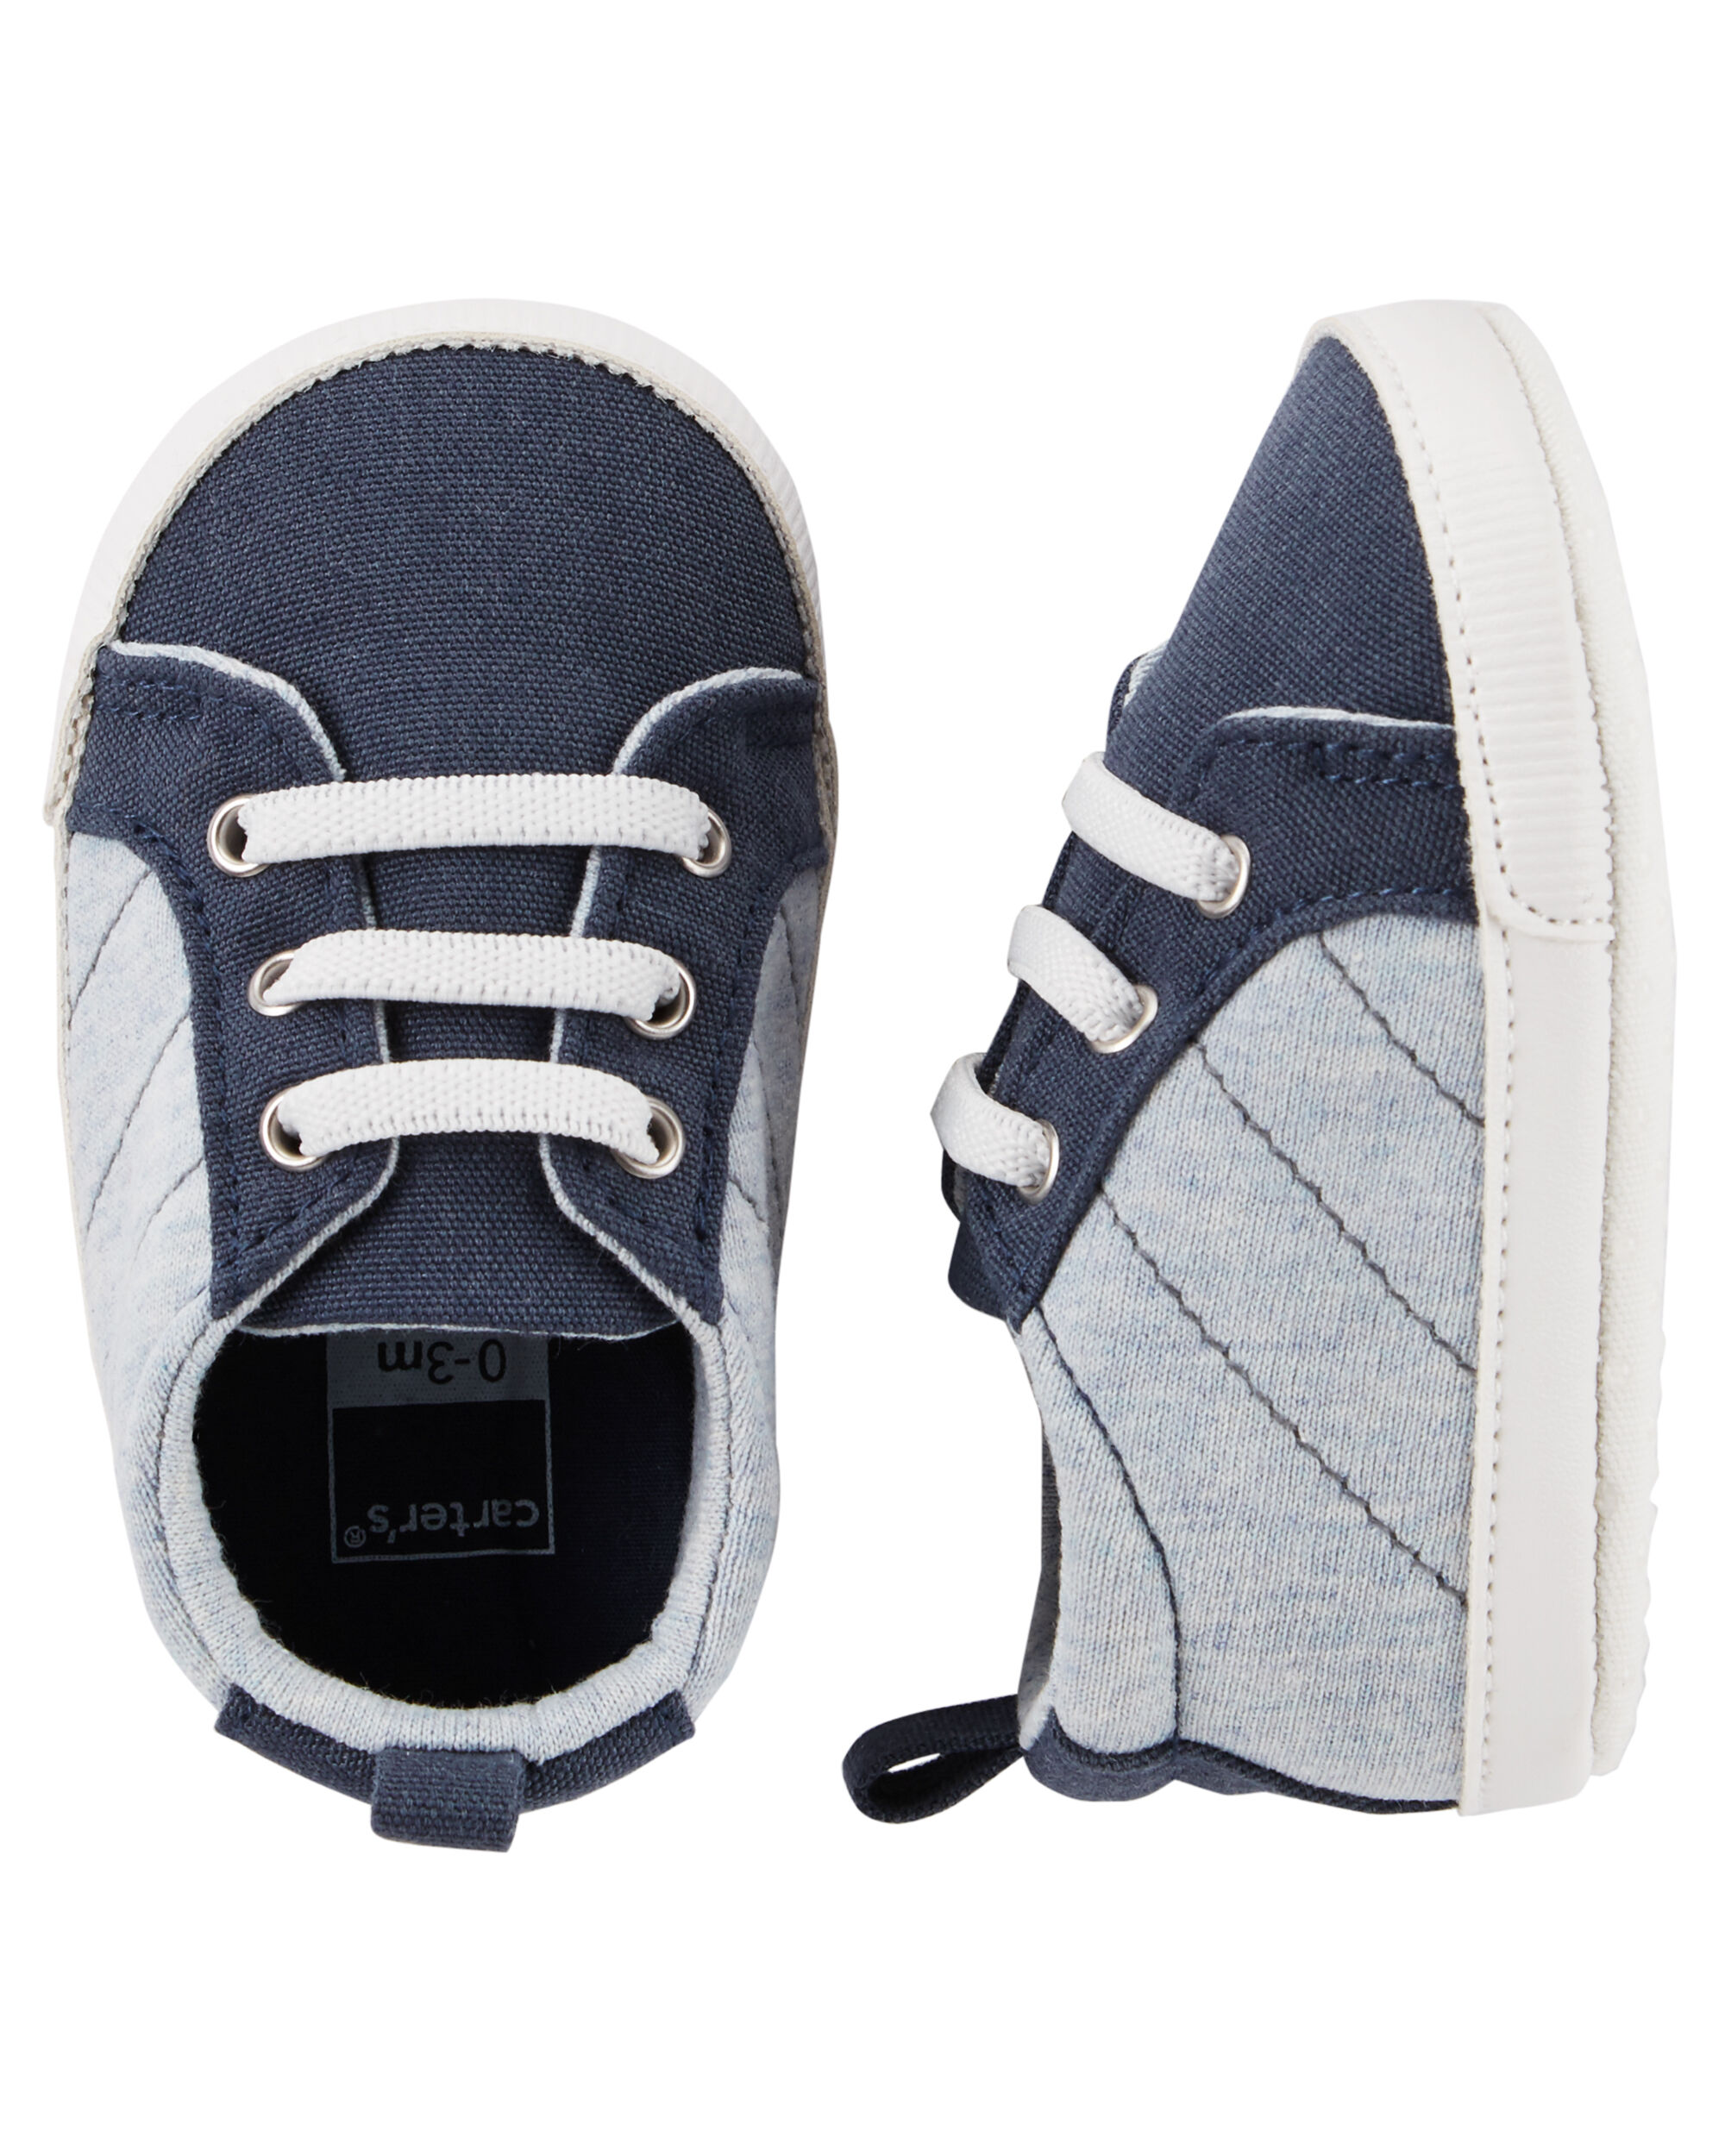 Canvas Sneaker Crib Shoes | carters 